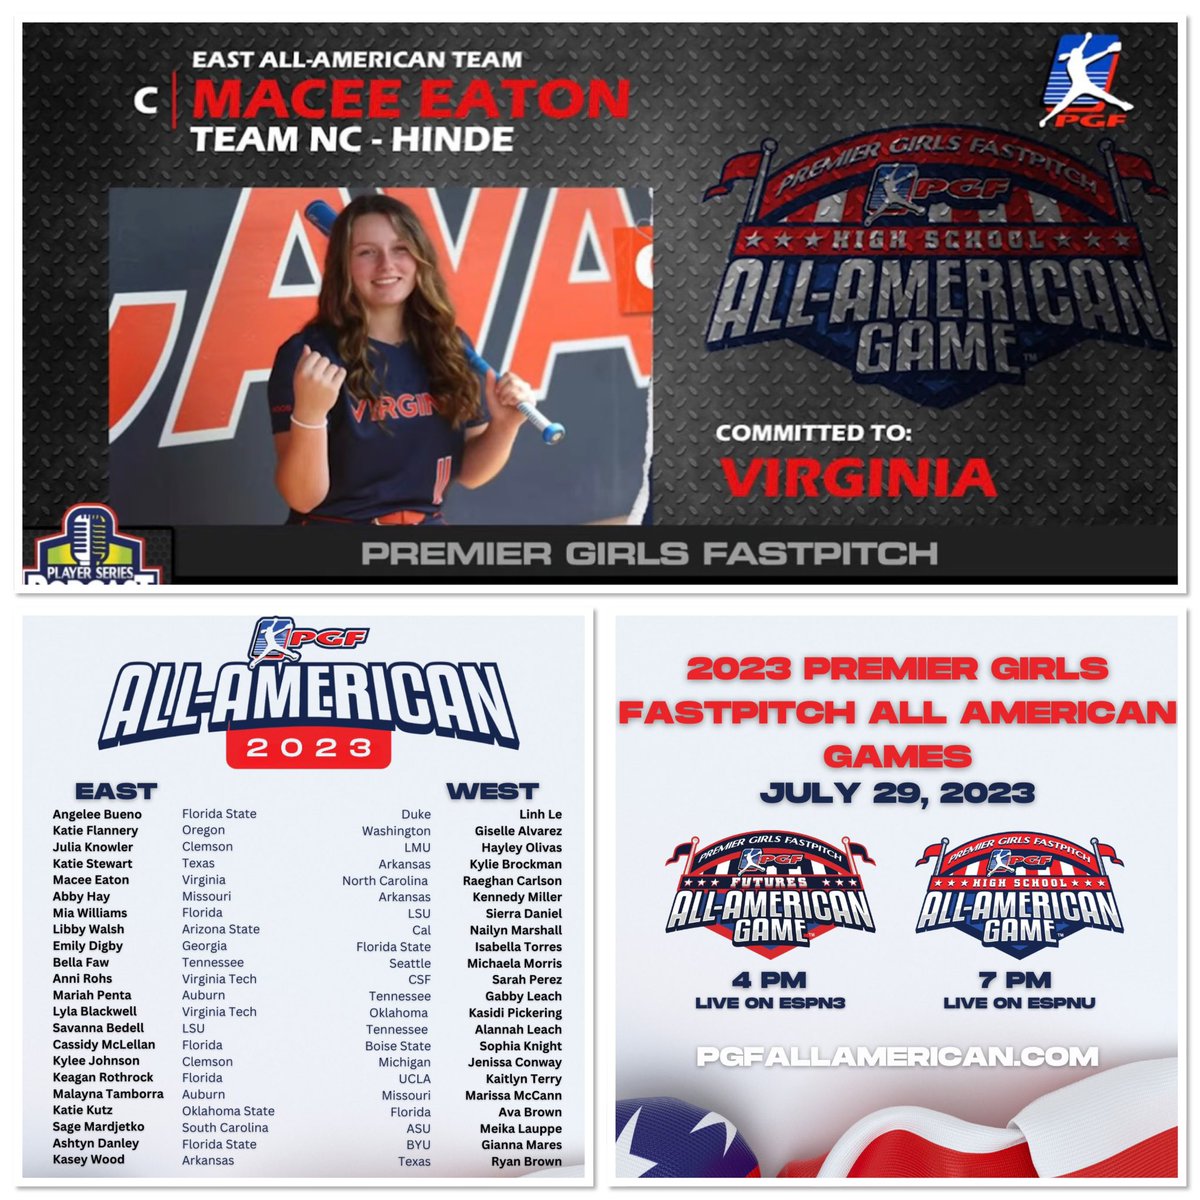 Congratulations to 2023 @UVASoftball commit @MaceeEaton2023 for her selection to the @PGFnetwork High School All-American Team representing the East! Save the date below to watch Macee make the first of what’s expected to be many appearances on ESPN! #TeamNC #PGFAllAmerican